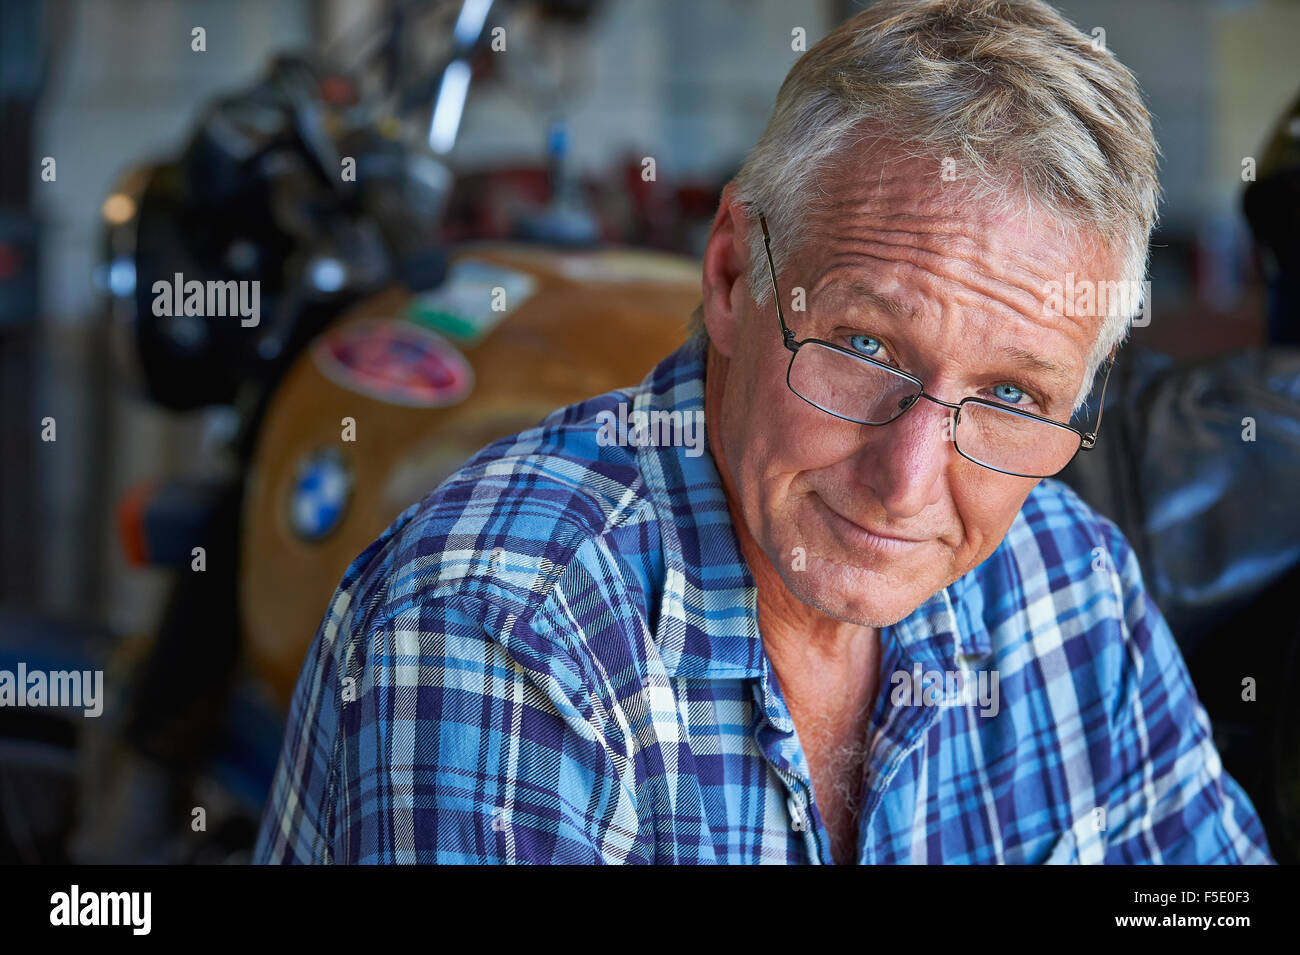 Portrait of a middle aged man and his old motor bike. His tough exterior is softened by his blue eyes and comforting smile. Stock Photo